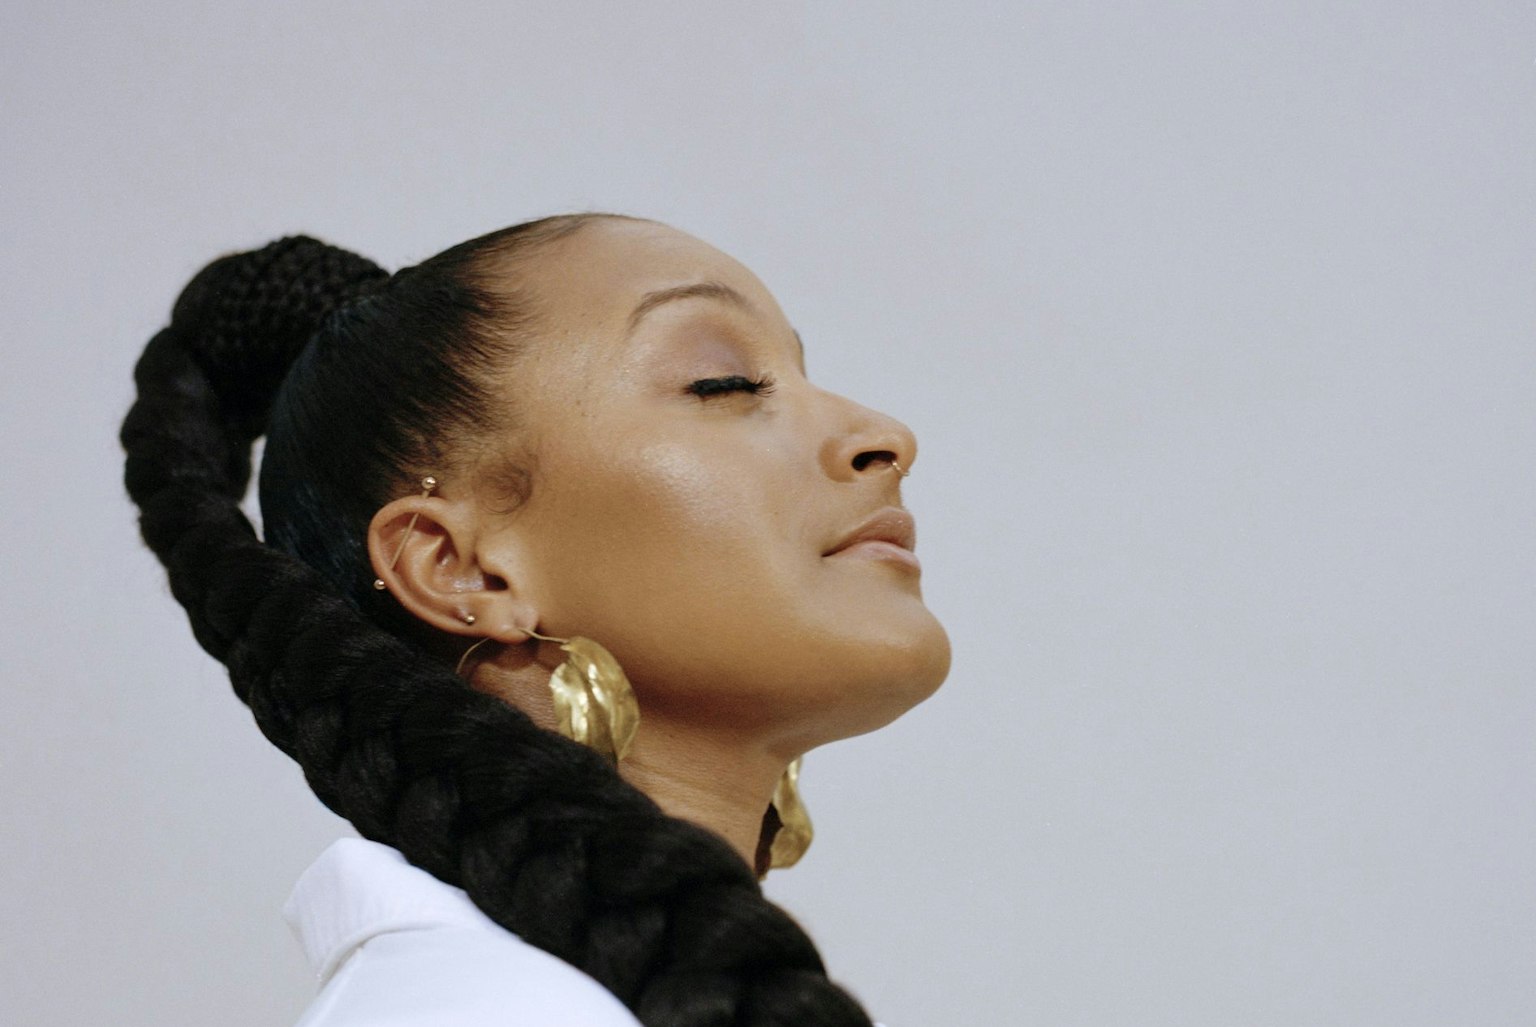 The artist Nubya Garcia has their eyes closed and head tilted upwards. Nubya is wearing a crisp white shirt and gold hoop earrings. Nubya's hair is plaited and cascades down over their shoulder. 